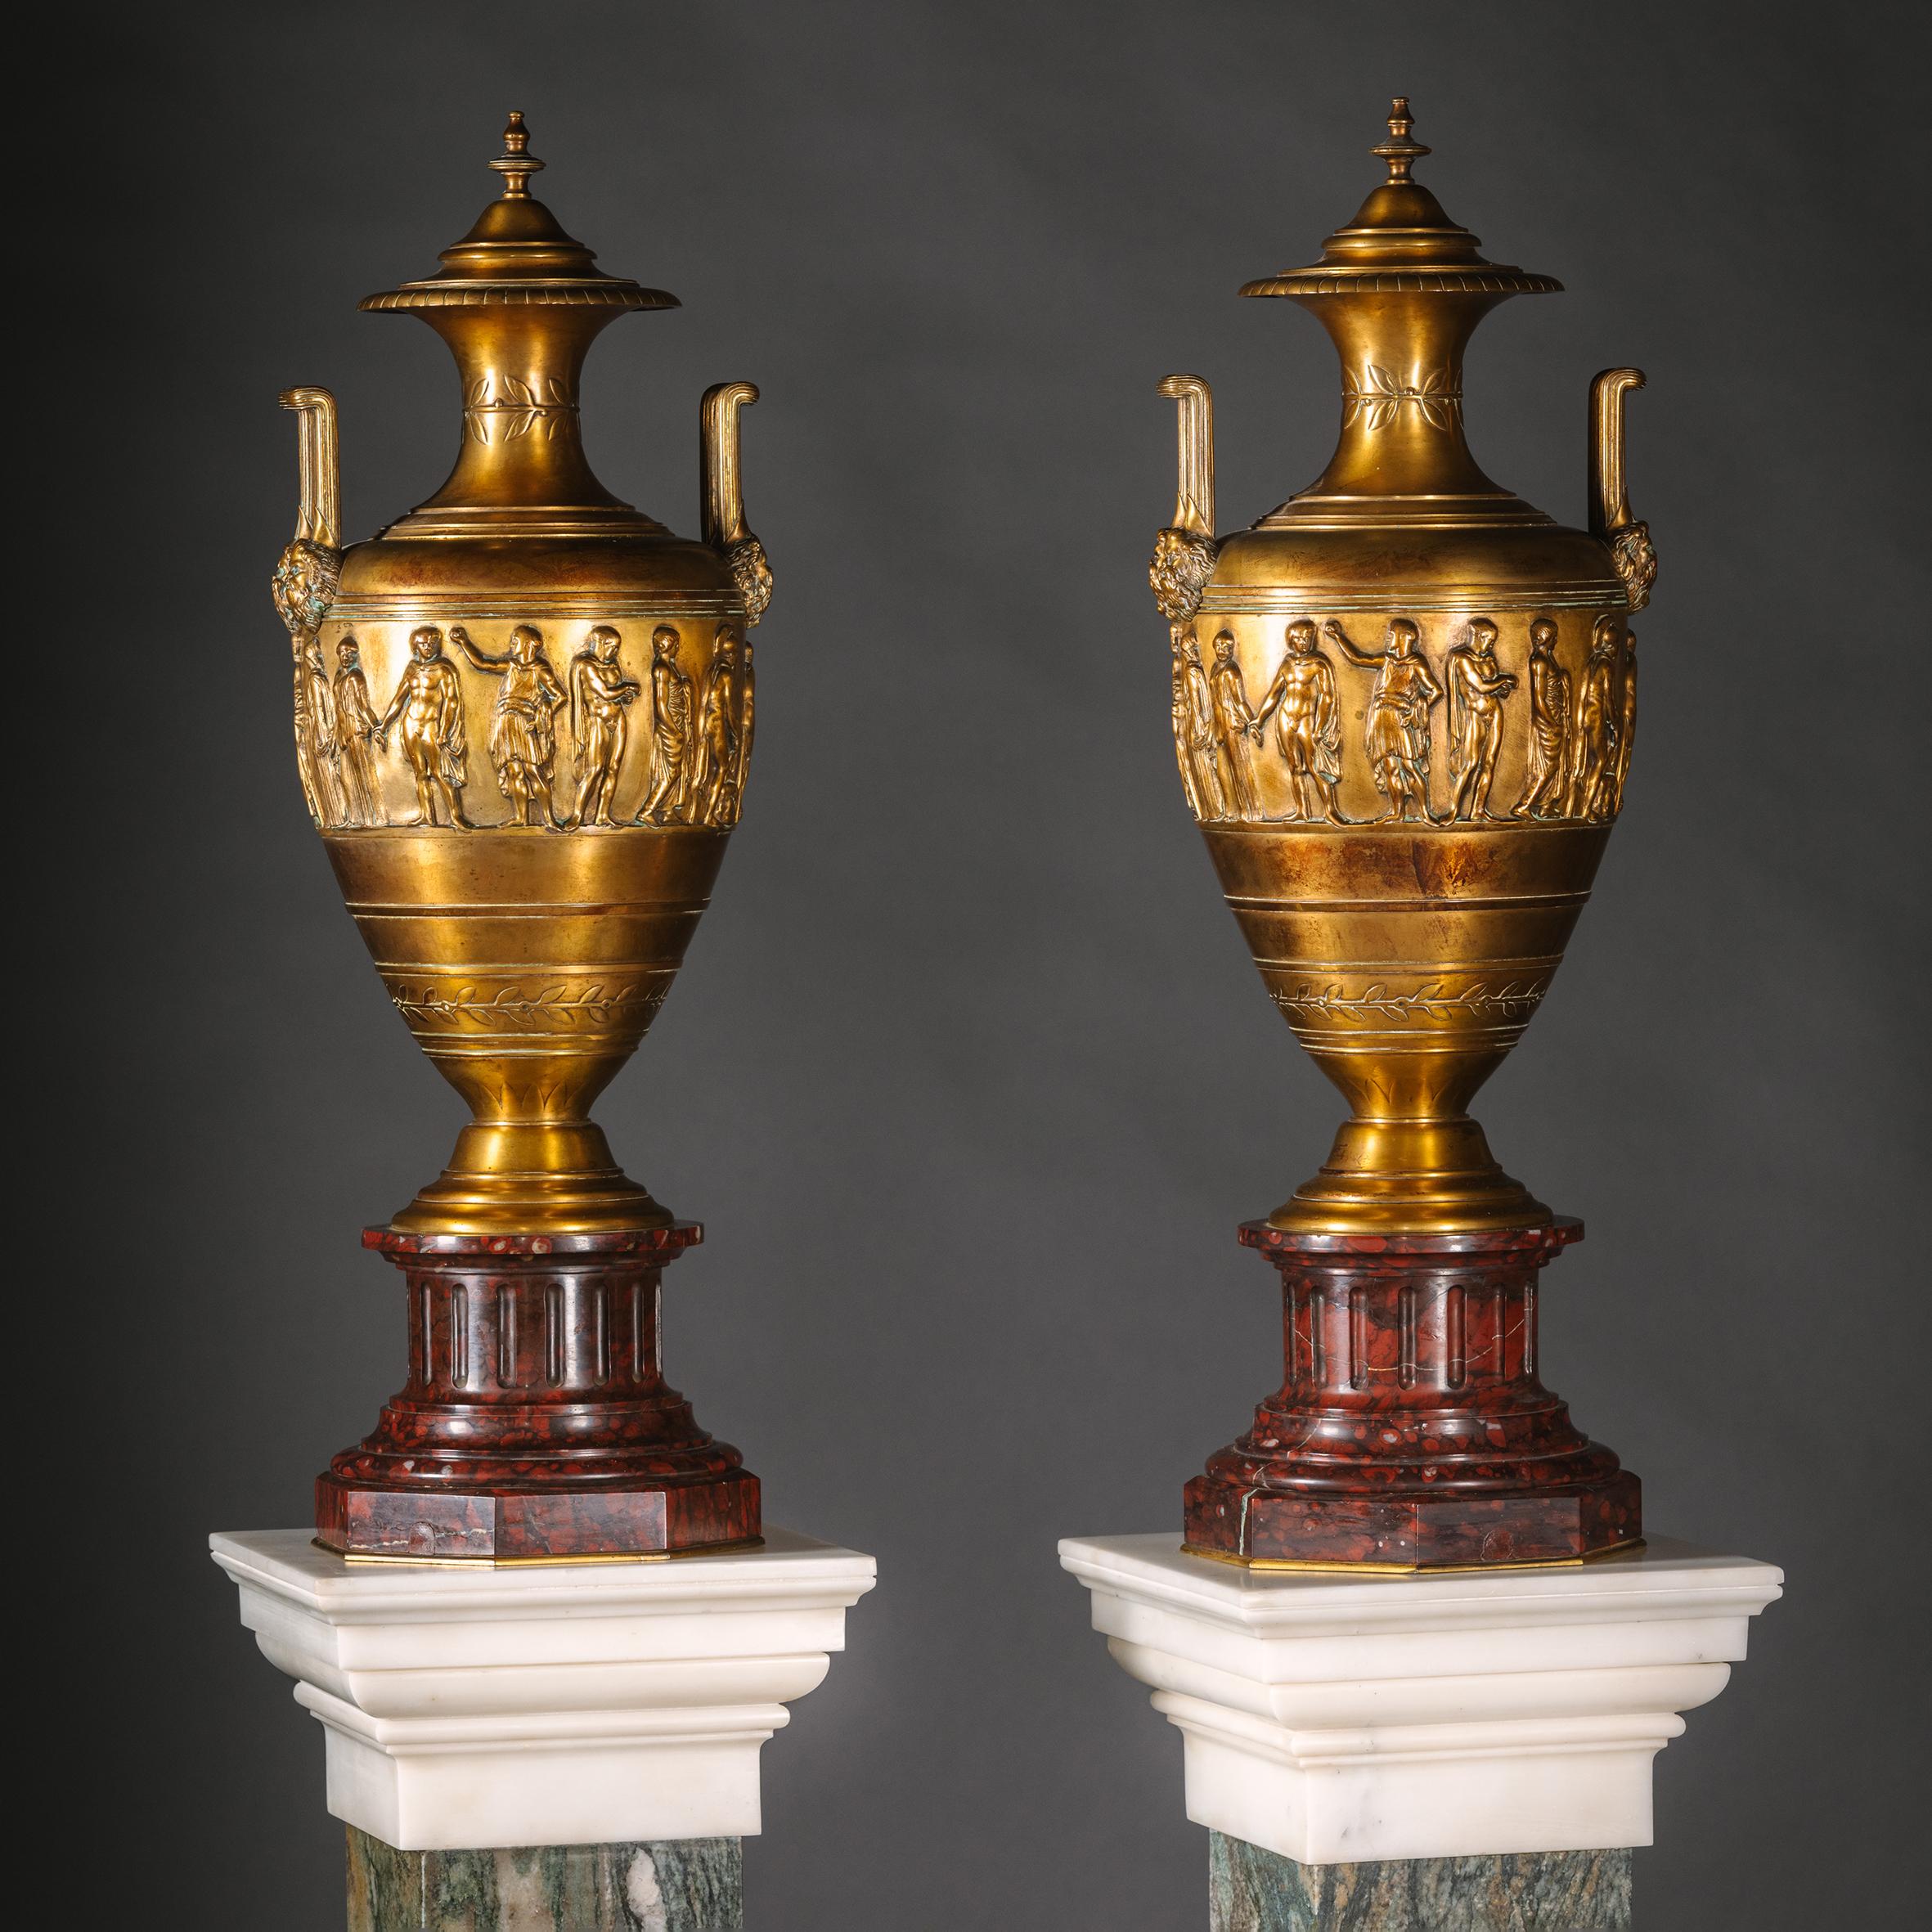 Neoclassical Revival Pair of Gilt-Bronze and Rouge Griotte Marble Vases and Covers For Sale